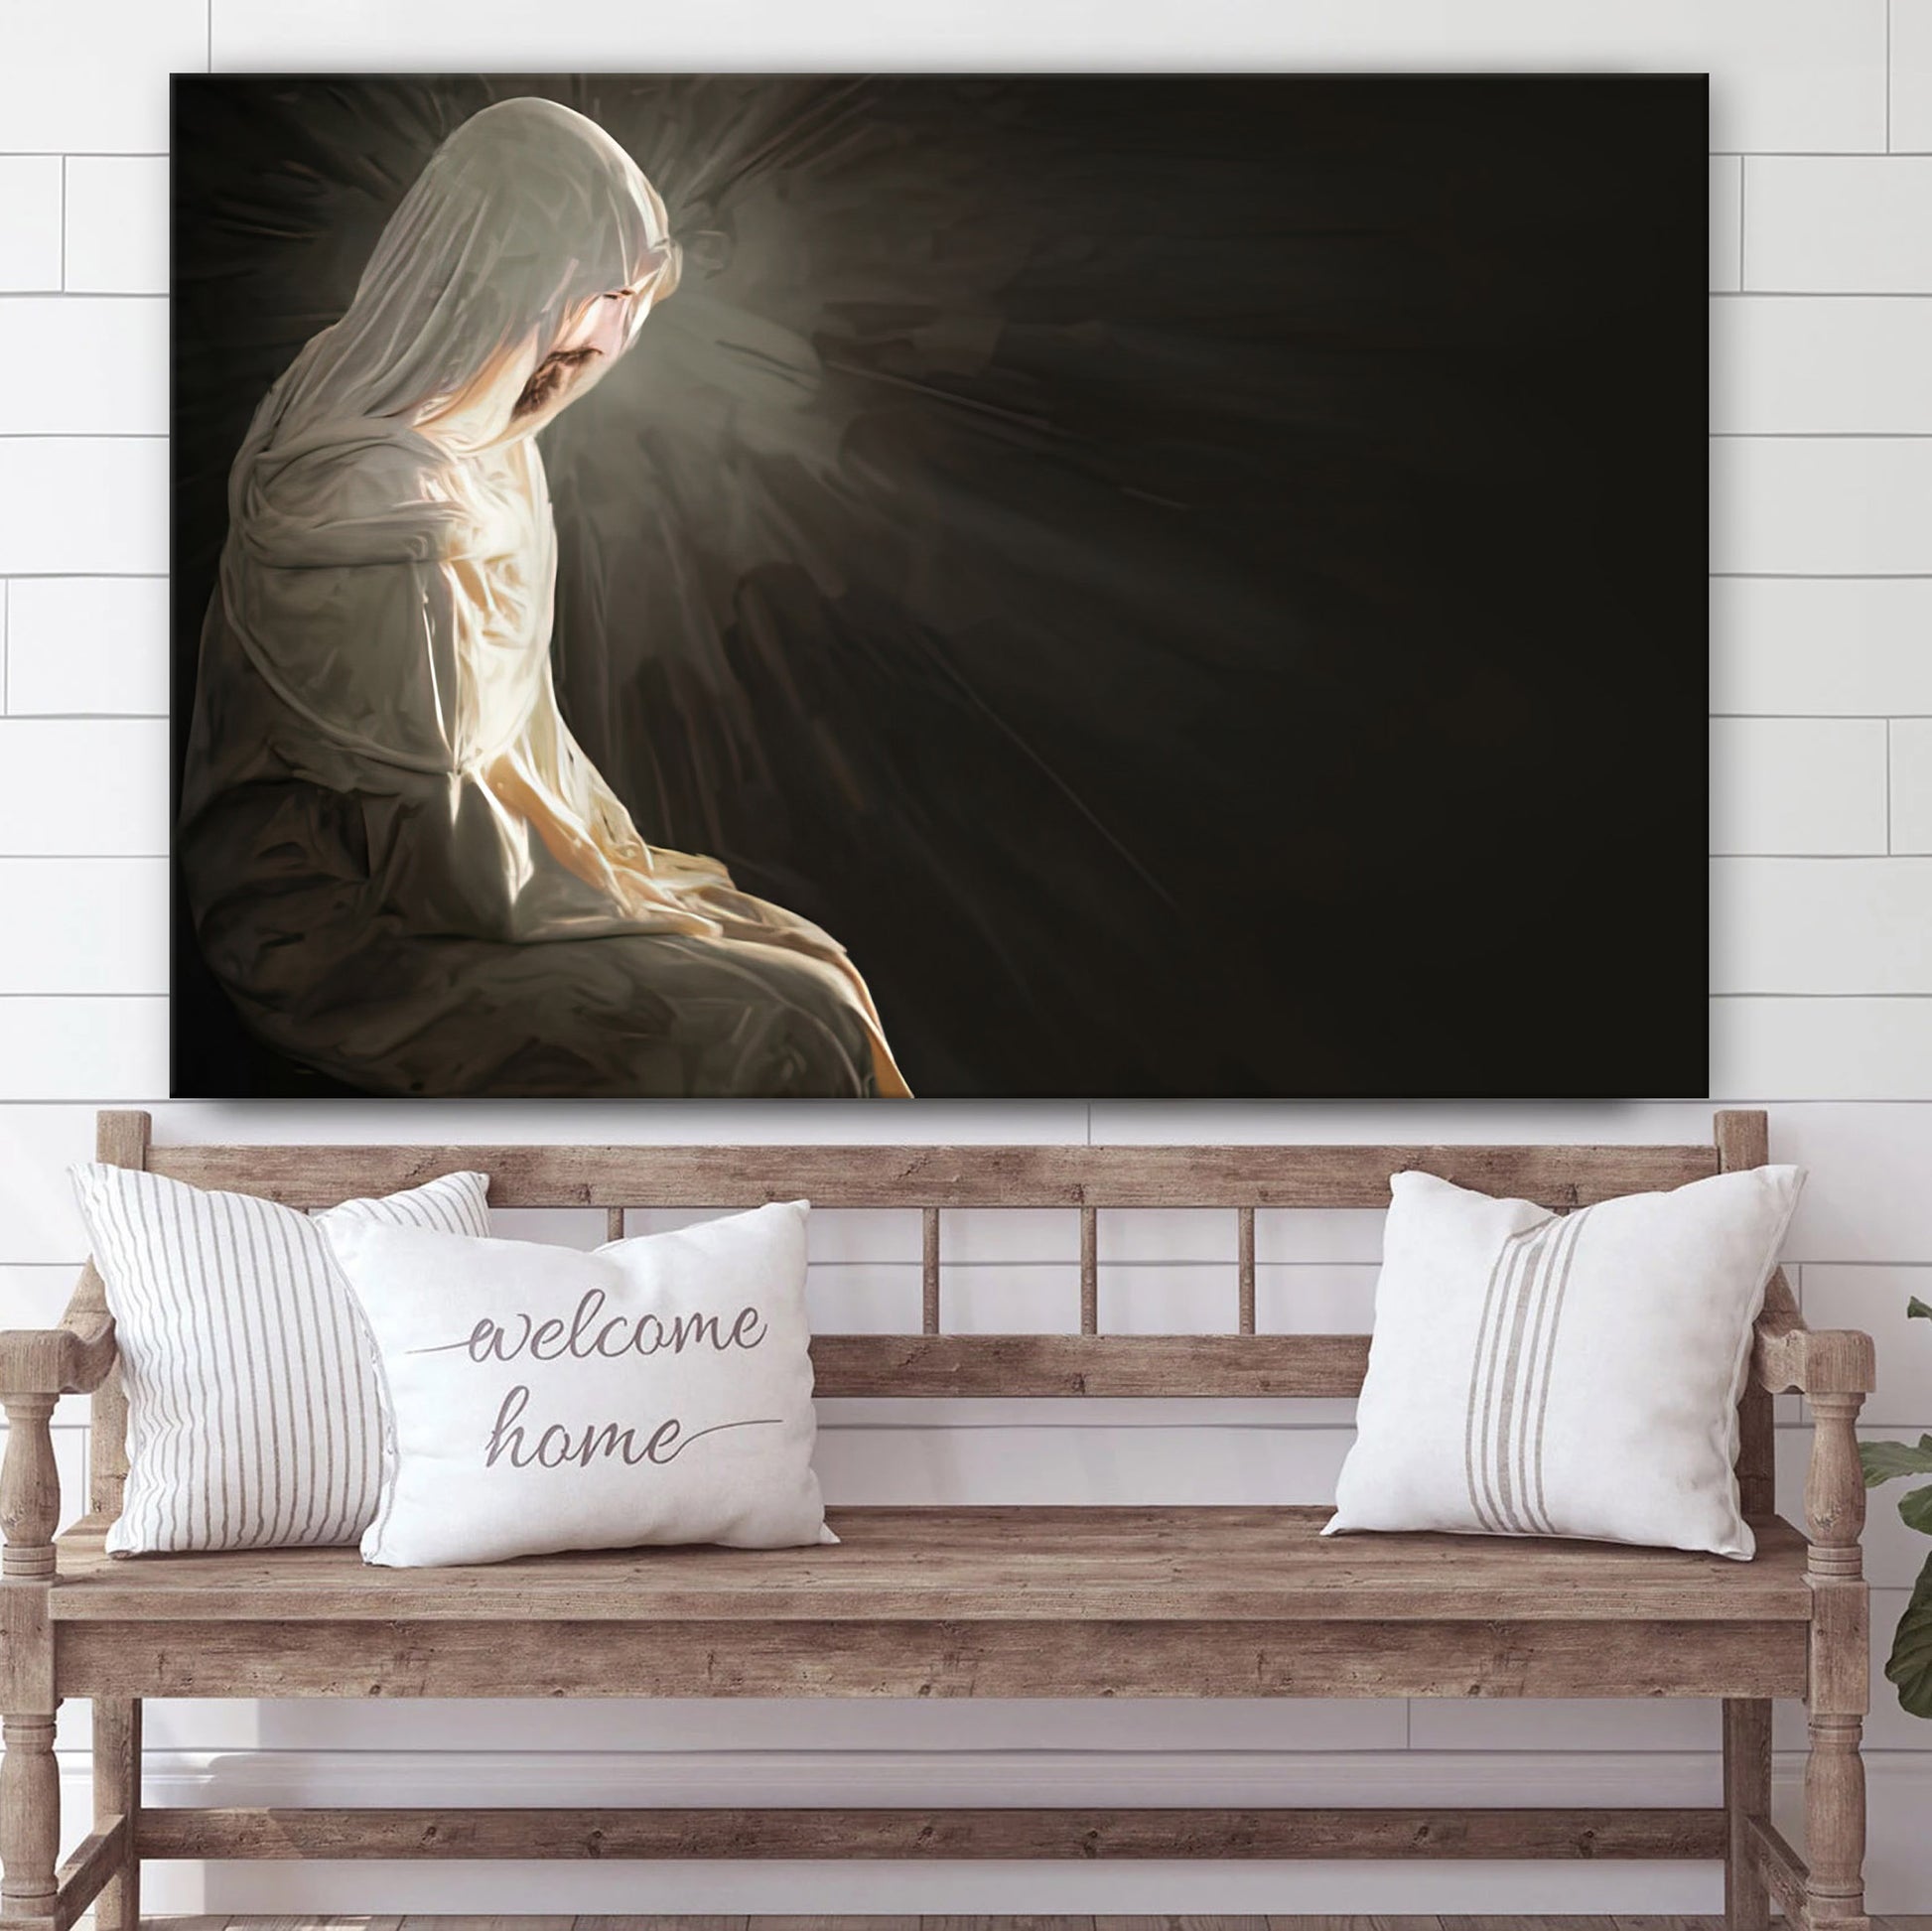 Pictures Of Jesus Canvas Art - Jesus Christ Pictures - Jesus Wall Art - Christian Wall Decor